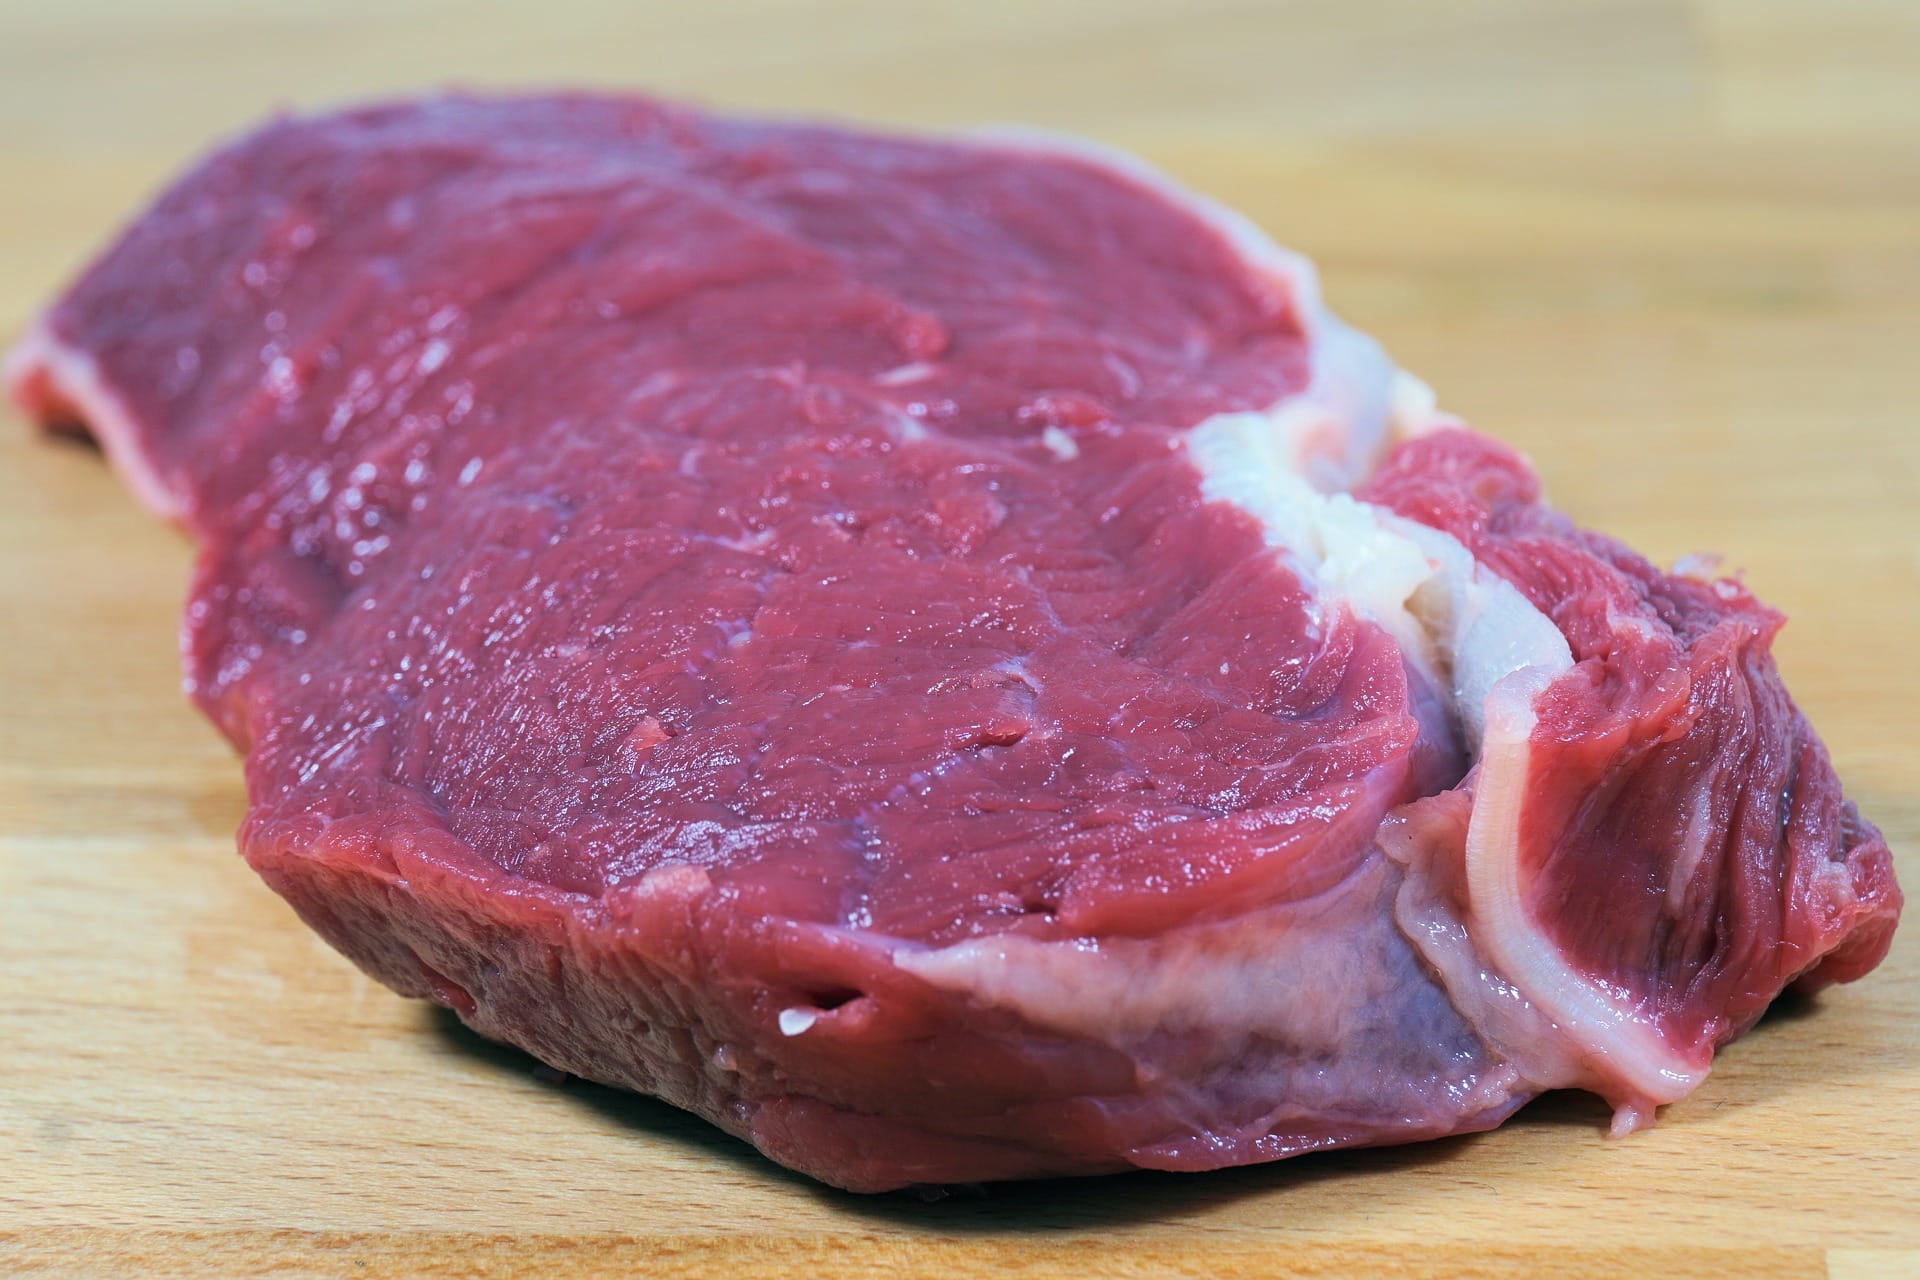 kenya-imports-beef-to-meet-the-high-meat-demand-in-the-country